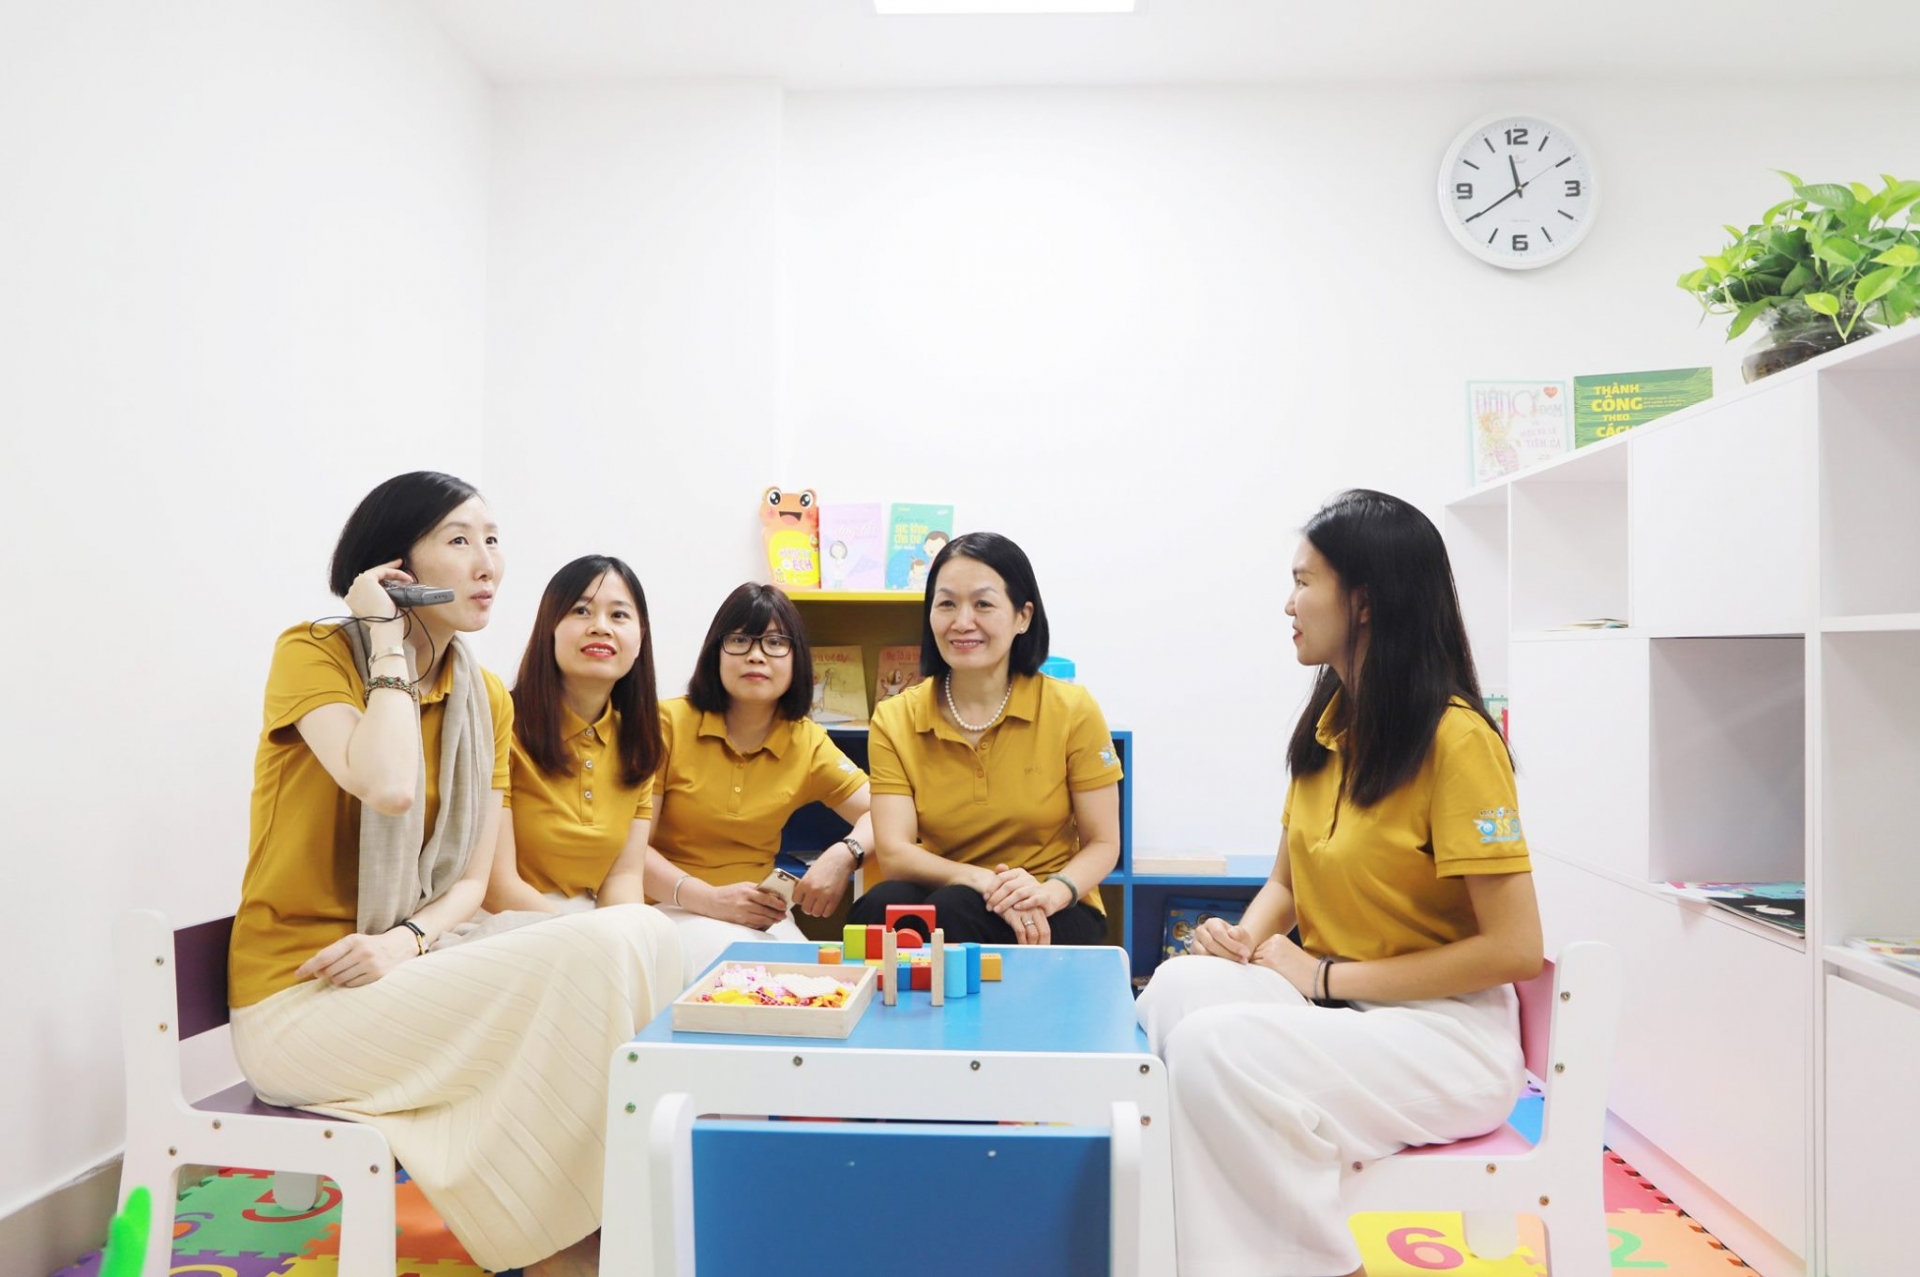 One Stop Support Office for returning migrant women launched in Hanoi